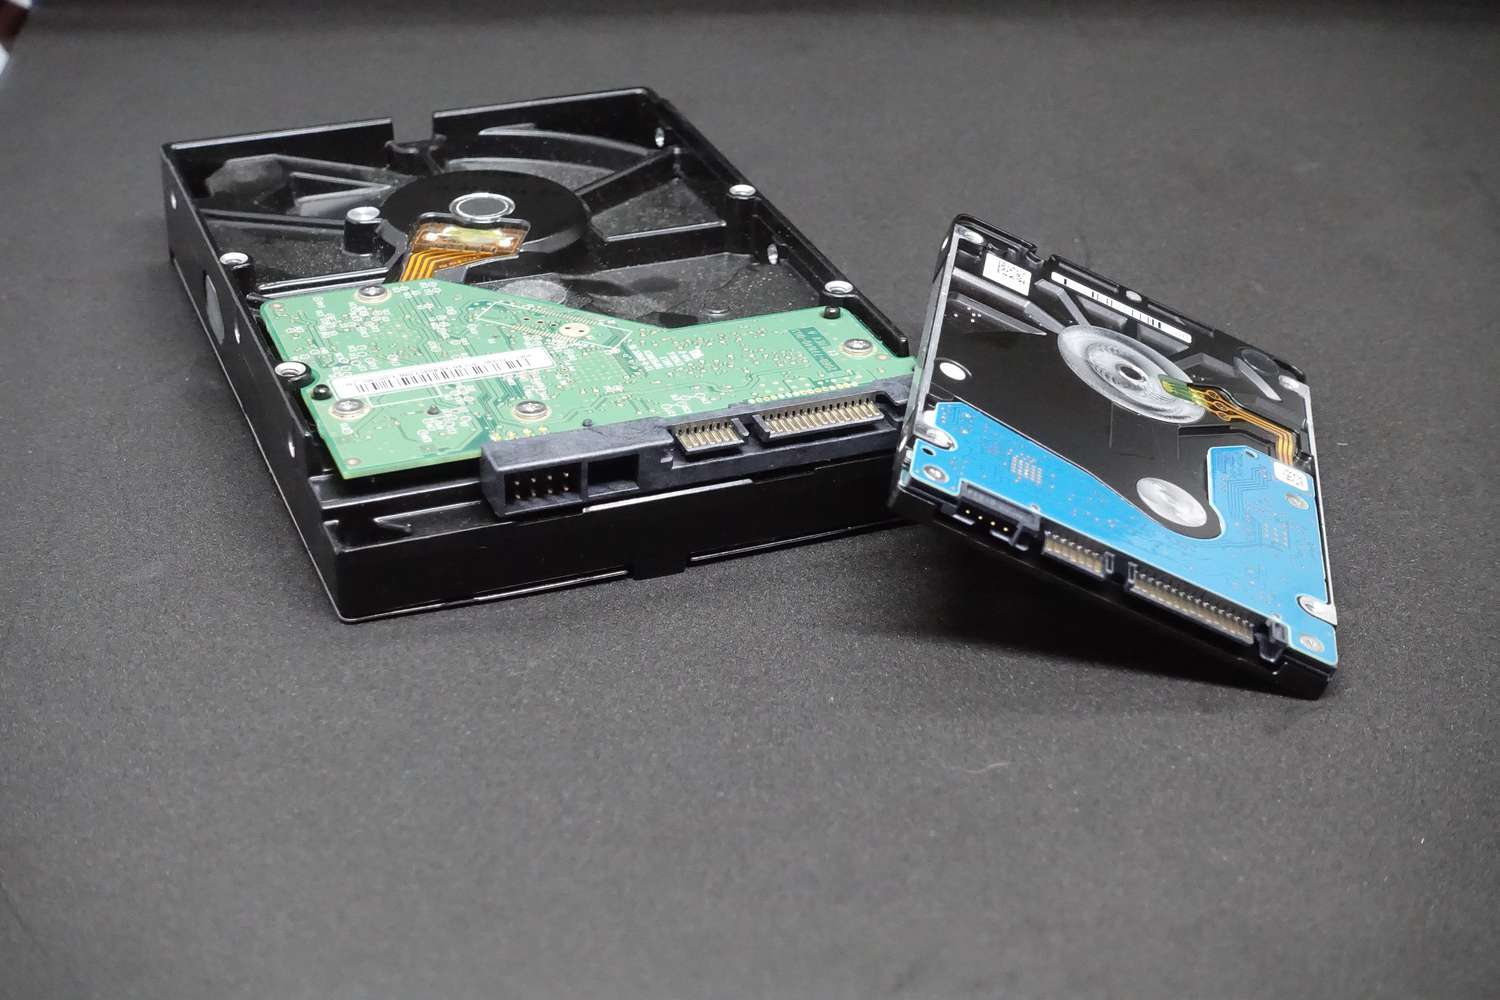 How To Change A Hard Disk Drive To Removable Storage: Easy Fix